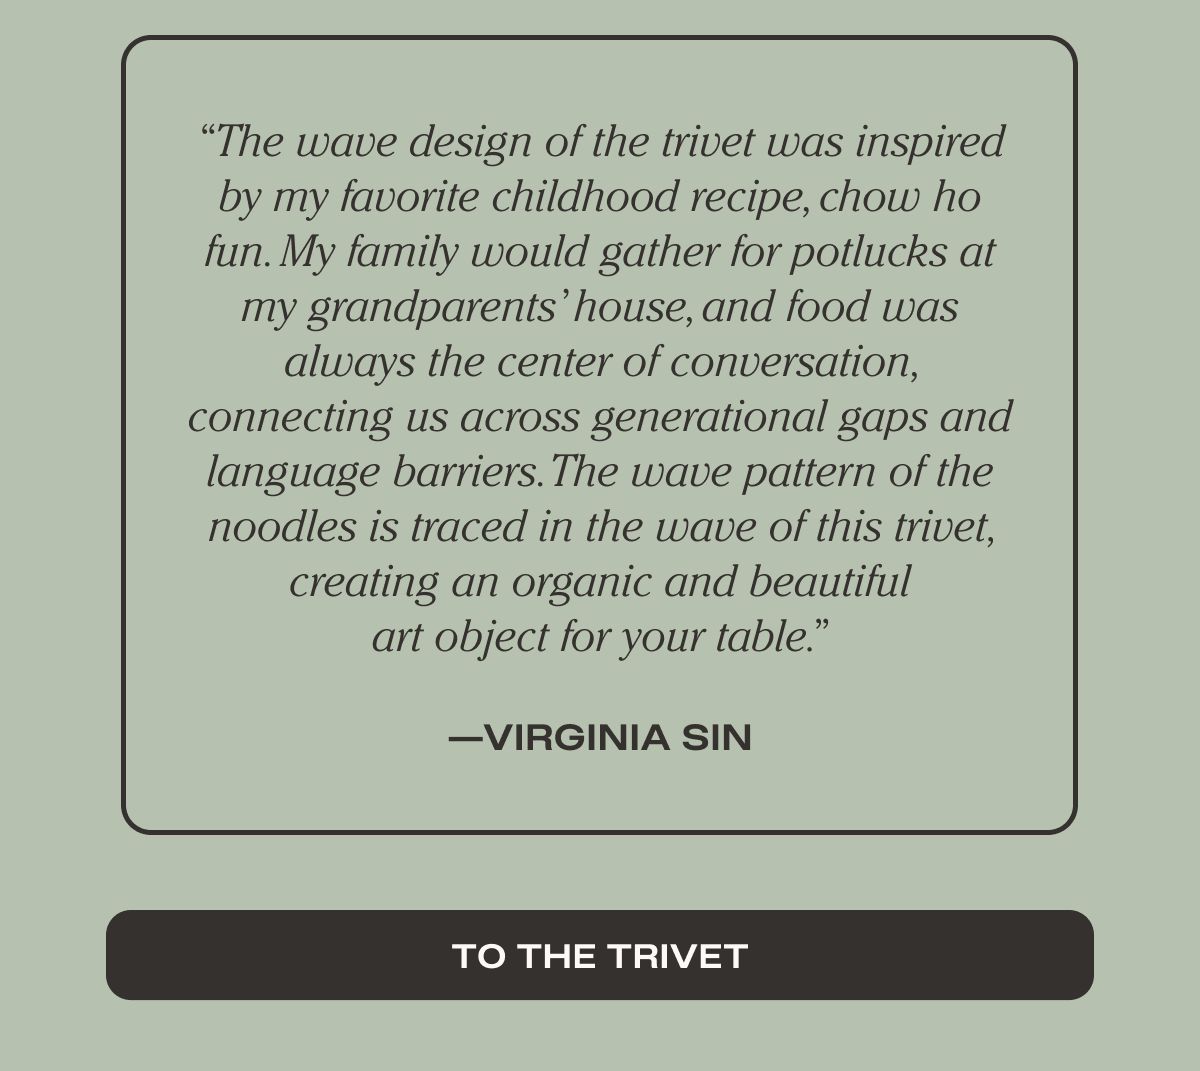 “The wave design of the trivet was inspired by my favorite childhood recipe, chow ho fun. My family would gather for potlucks at my grandparents’ house, and food was always the center of conversation, connecting us across generational gaps and language barriers. The wave pattern of the noodles is traced in the wave of this trivet, creating an organic and beautiful art object for your table.”  — Virginia Sin - To the Trivet